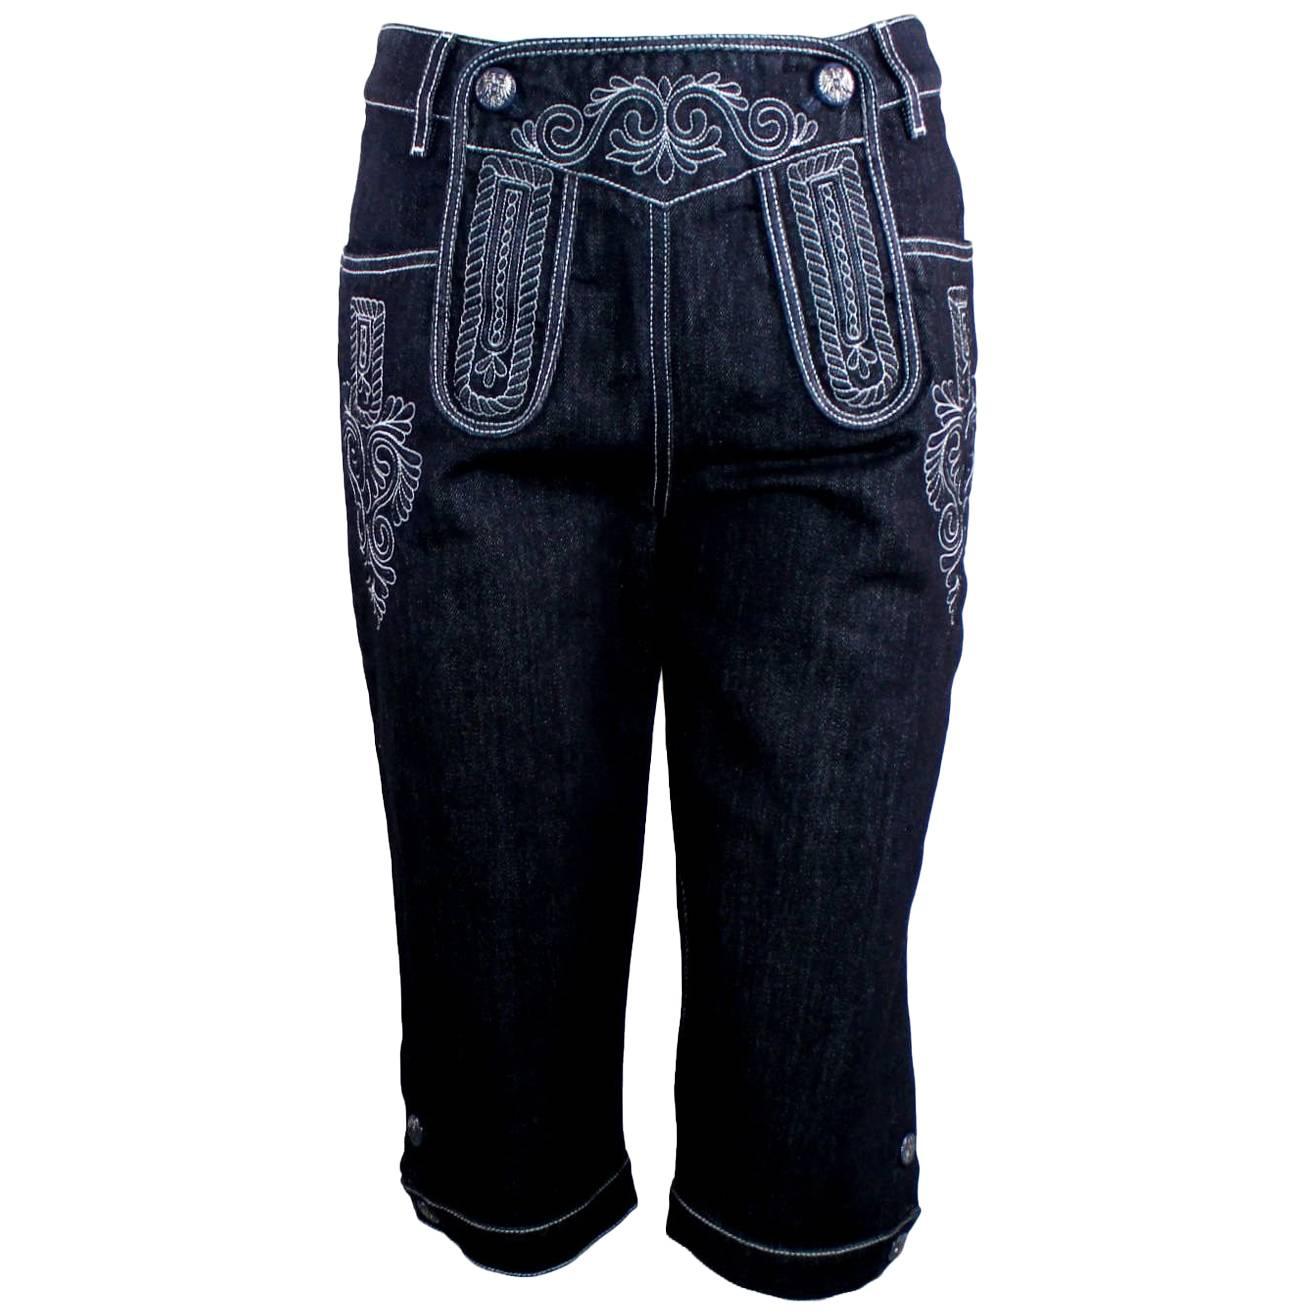 Chanel Embroidered Denim Jeans Pants Metiers d'Art Salzburg Collection